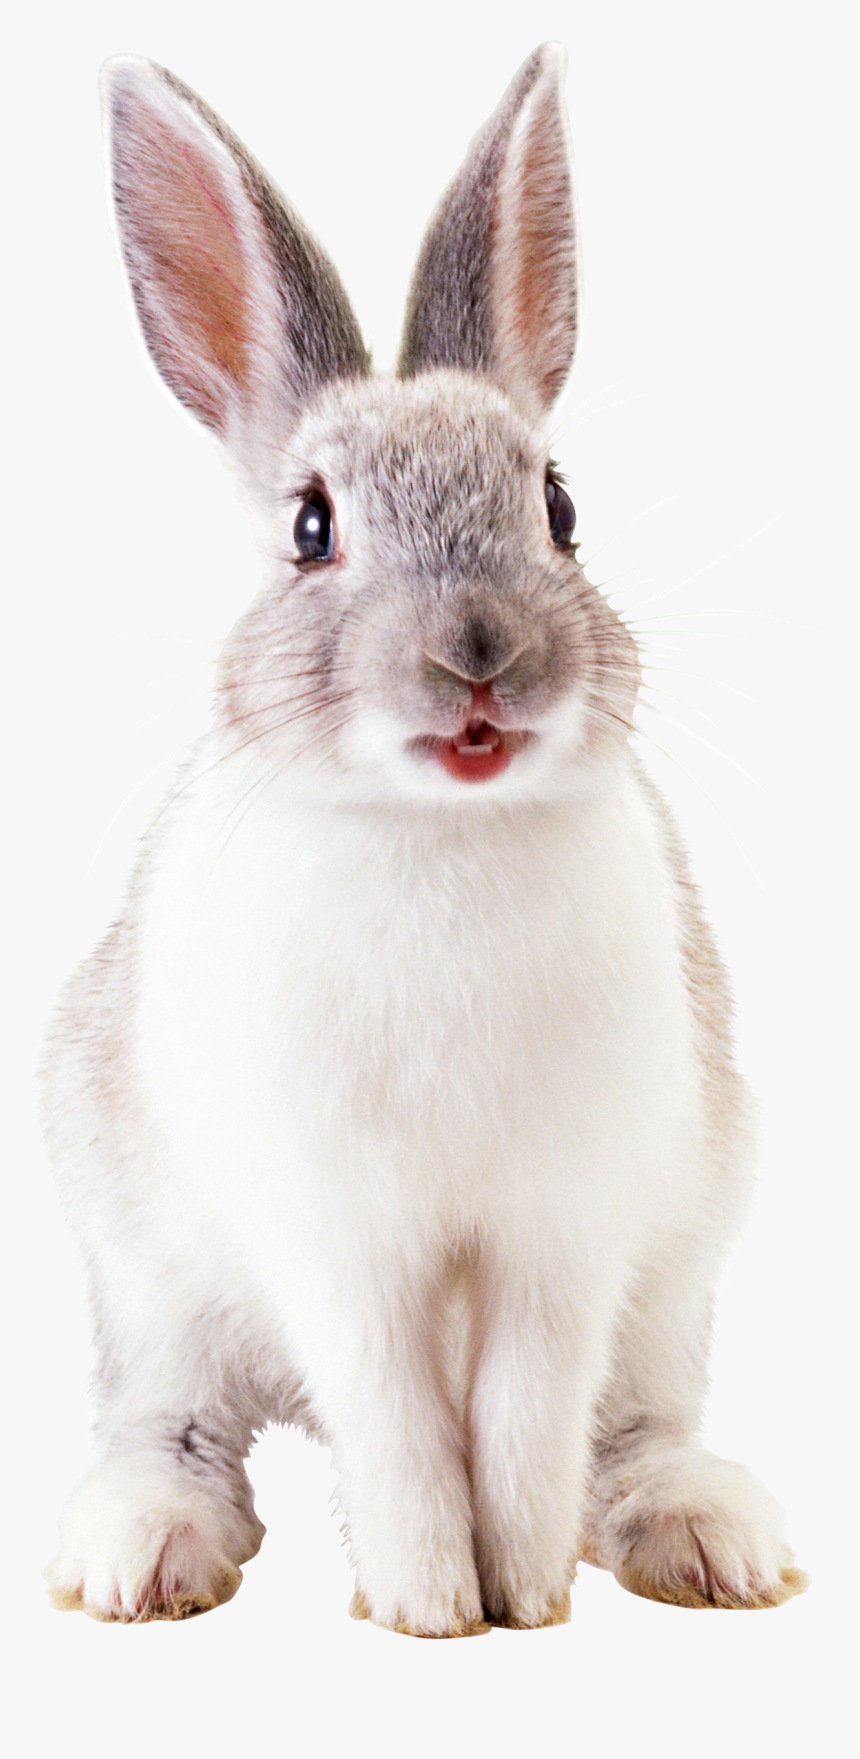 Png Picture Of A Rabbit - Cute Rabbit Png, Transparent Png, Free Download